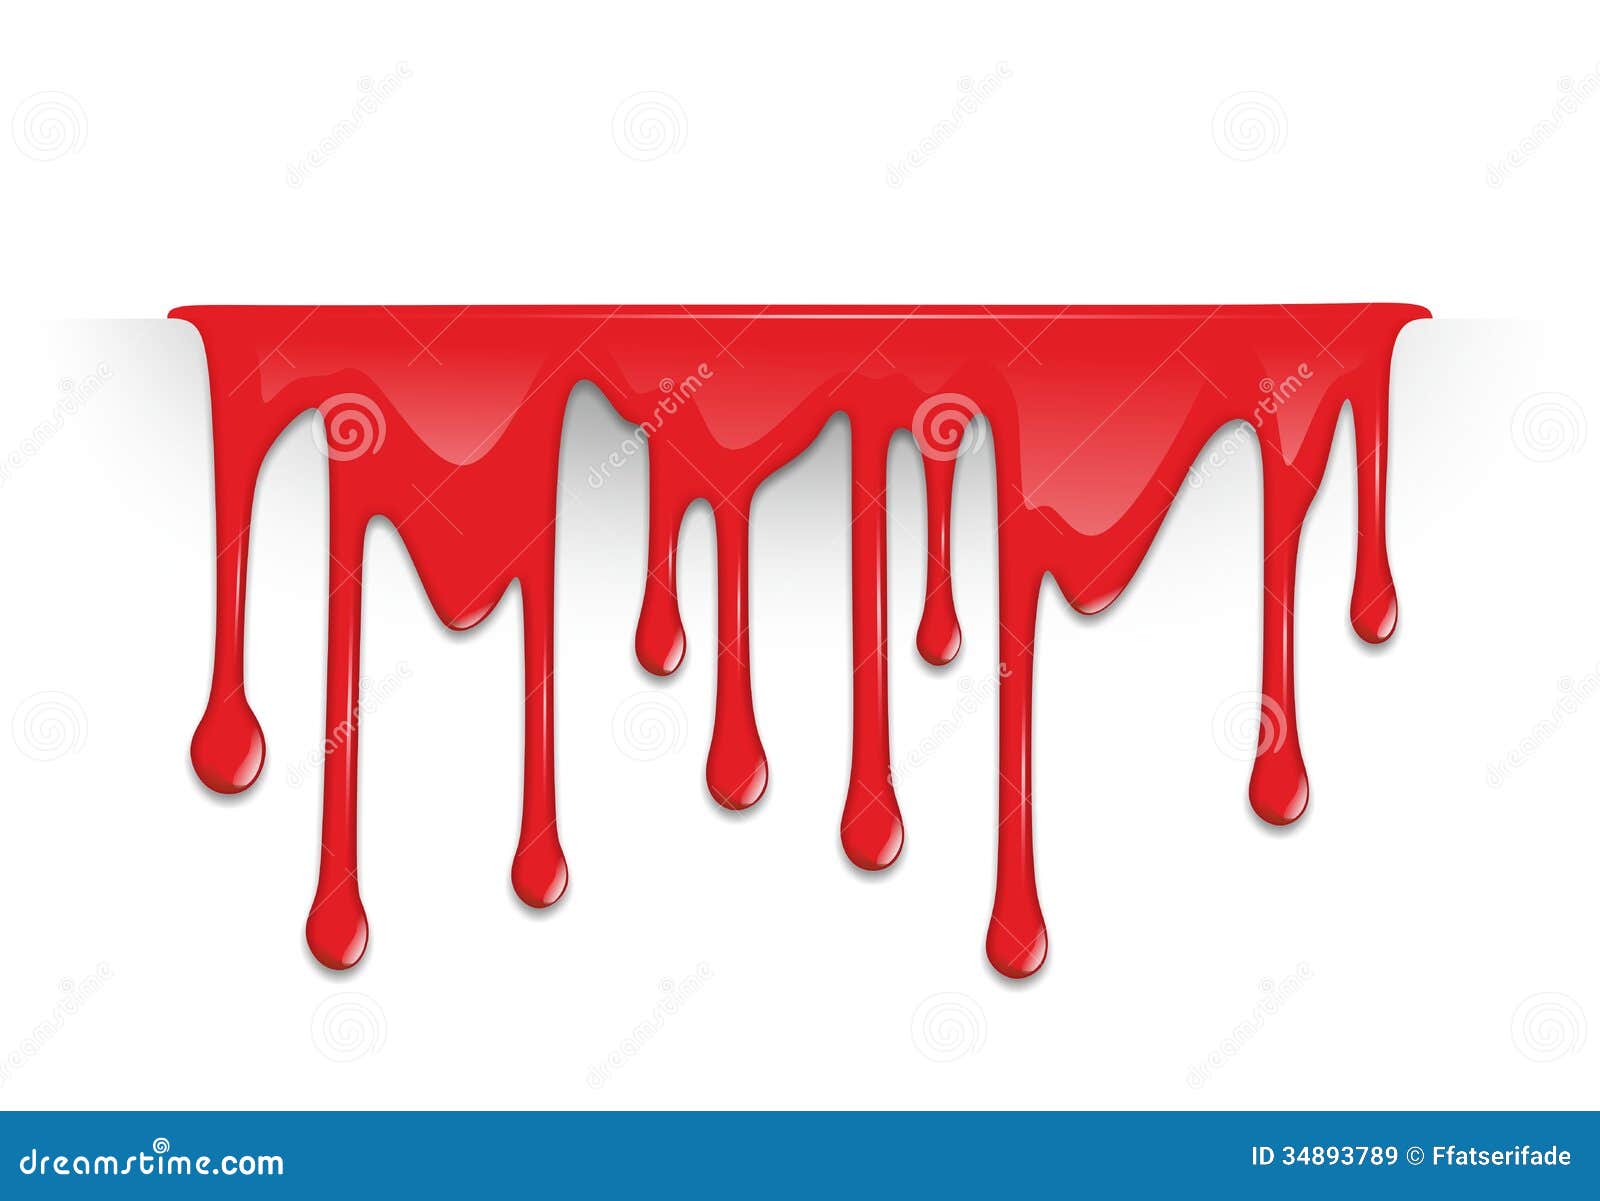 dripping blood clipart border free - photo #18